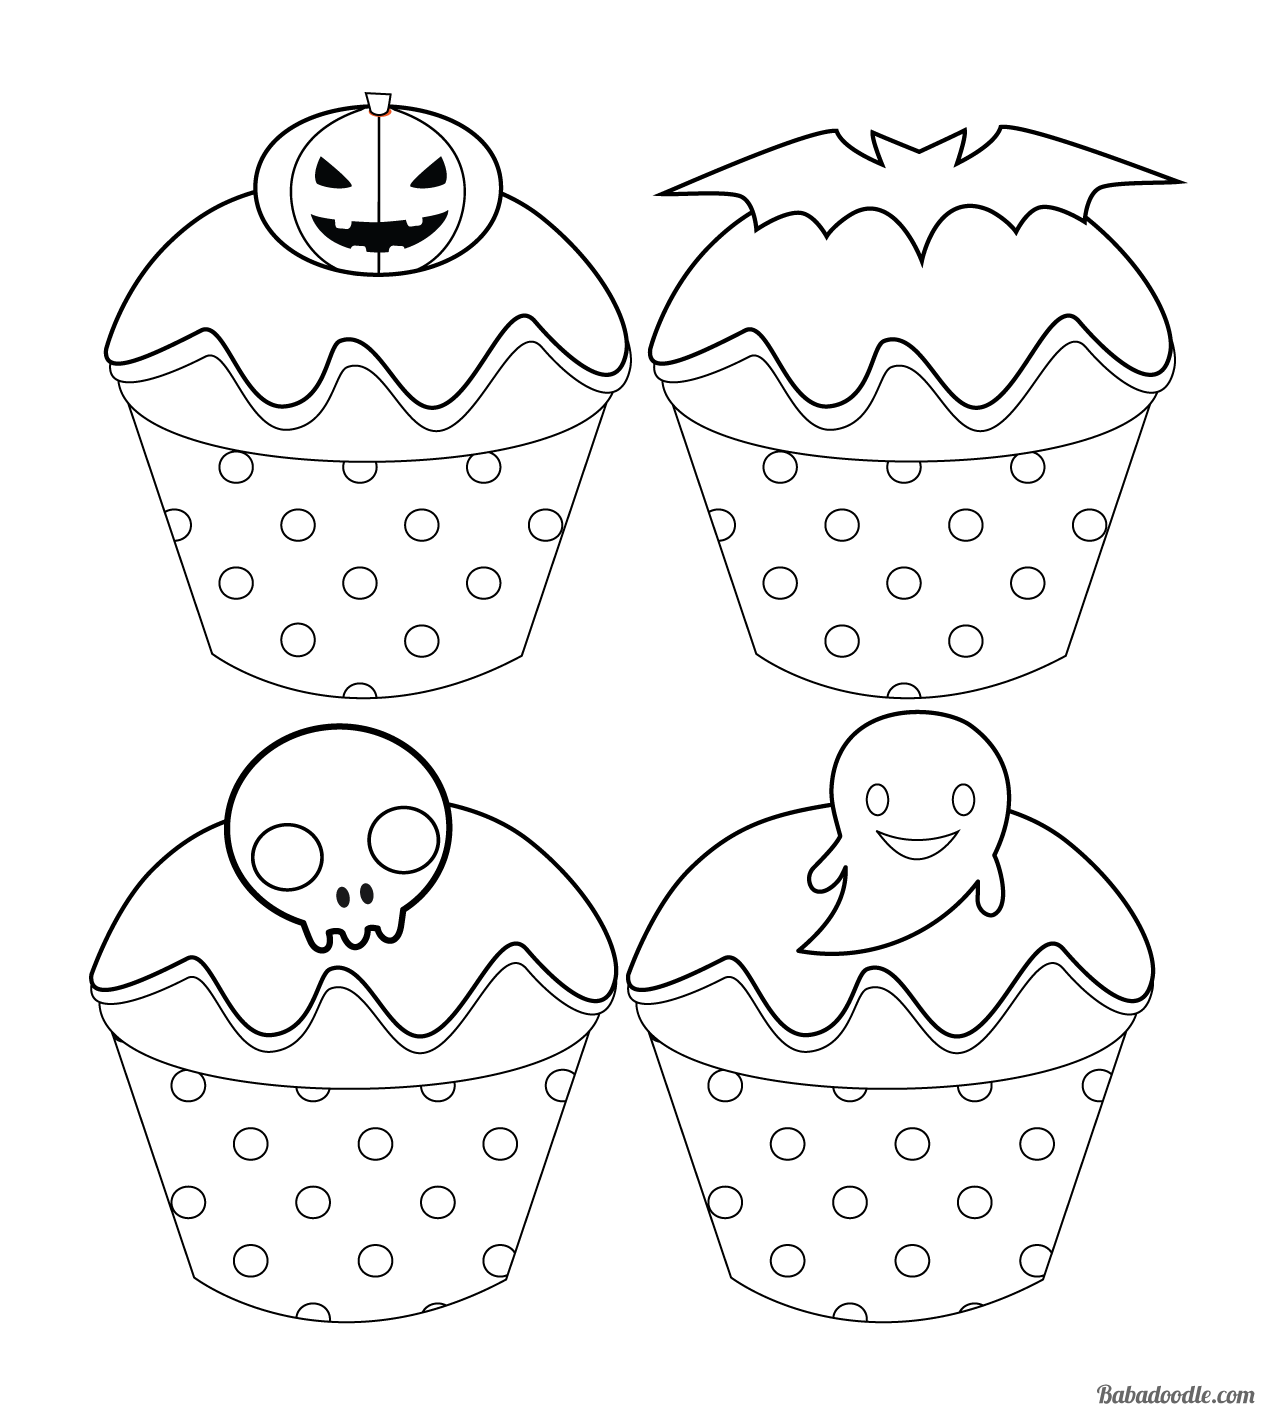 Free Halloween Cupcake Coloring Page – Babadoodle